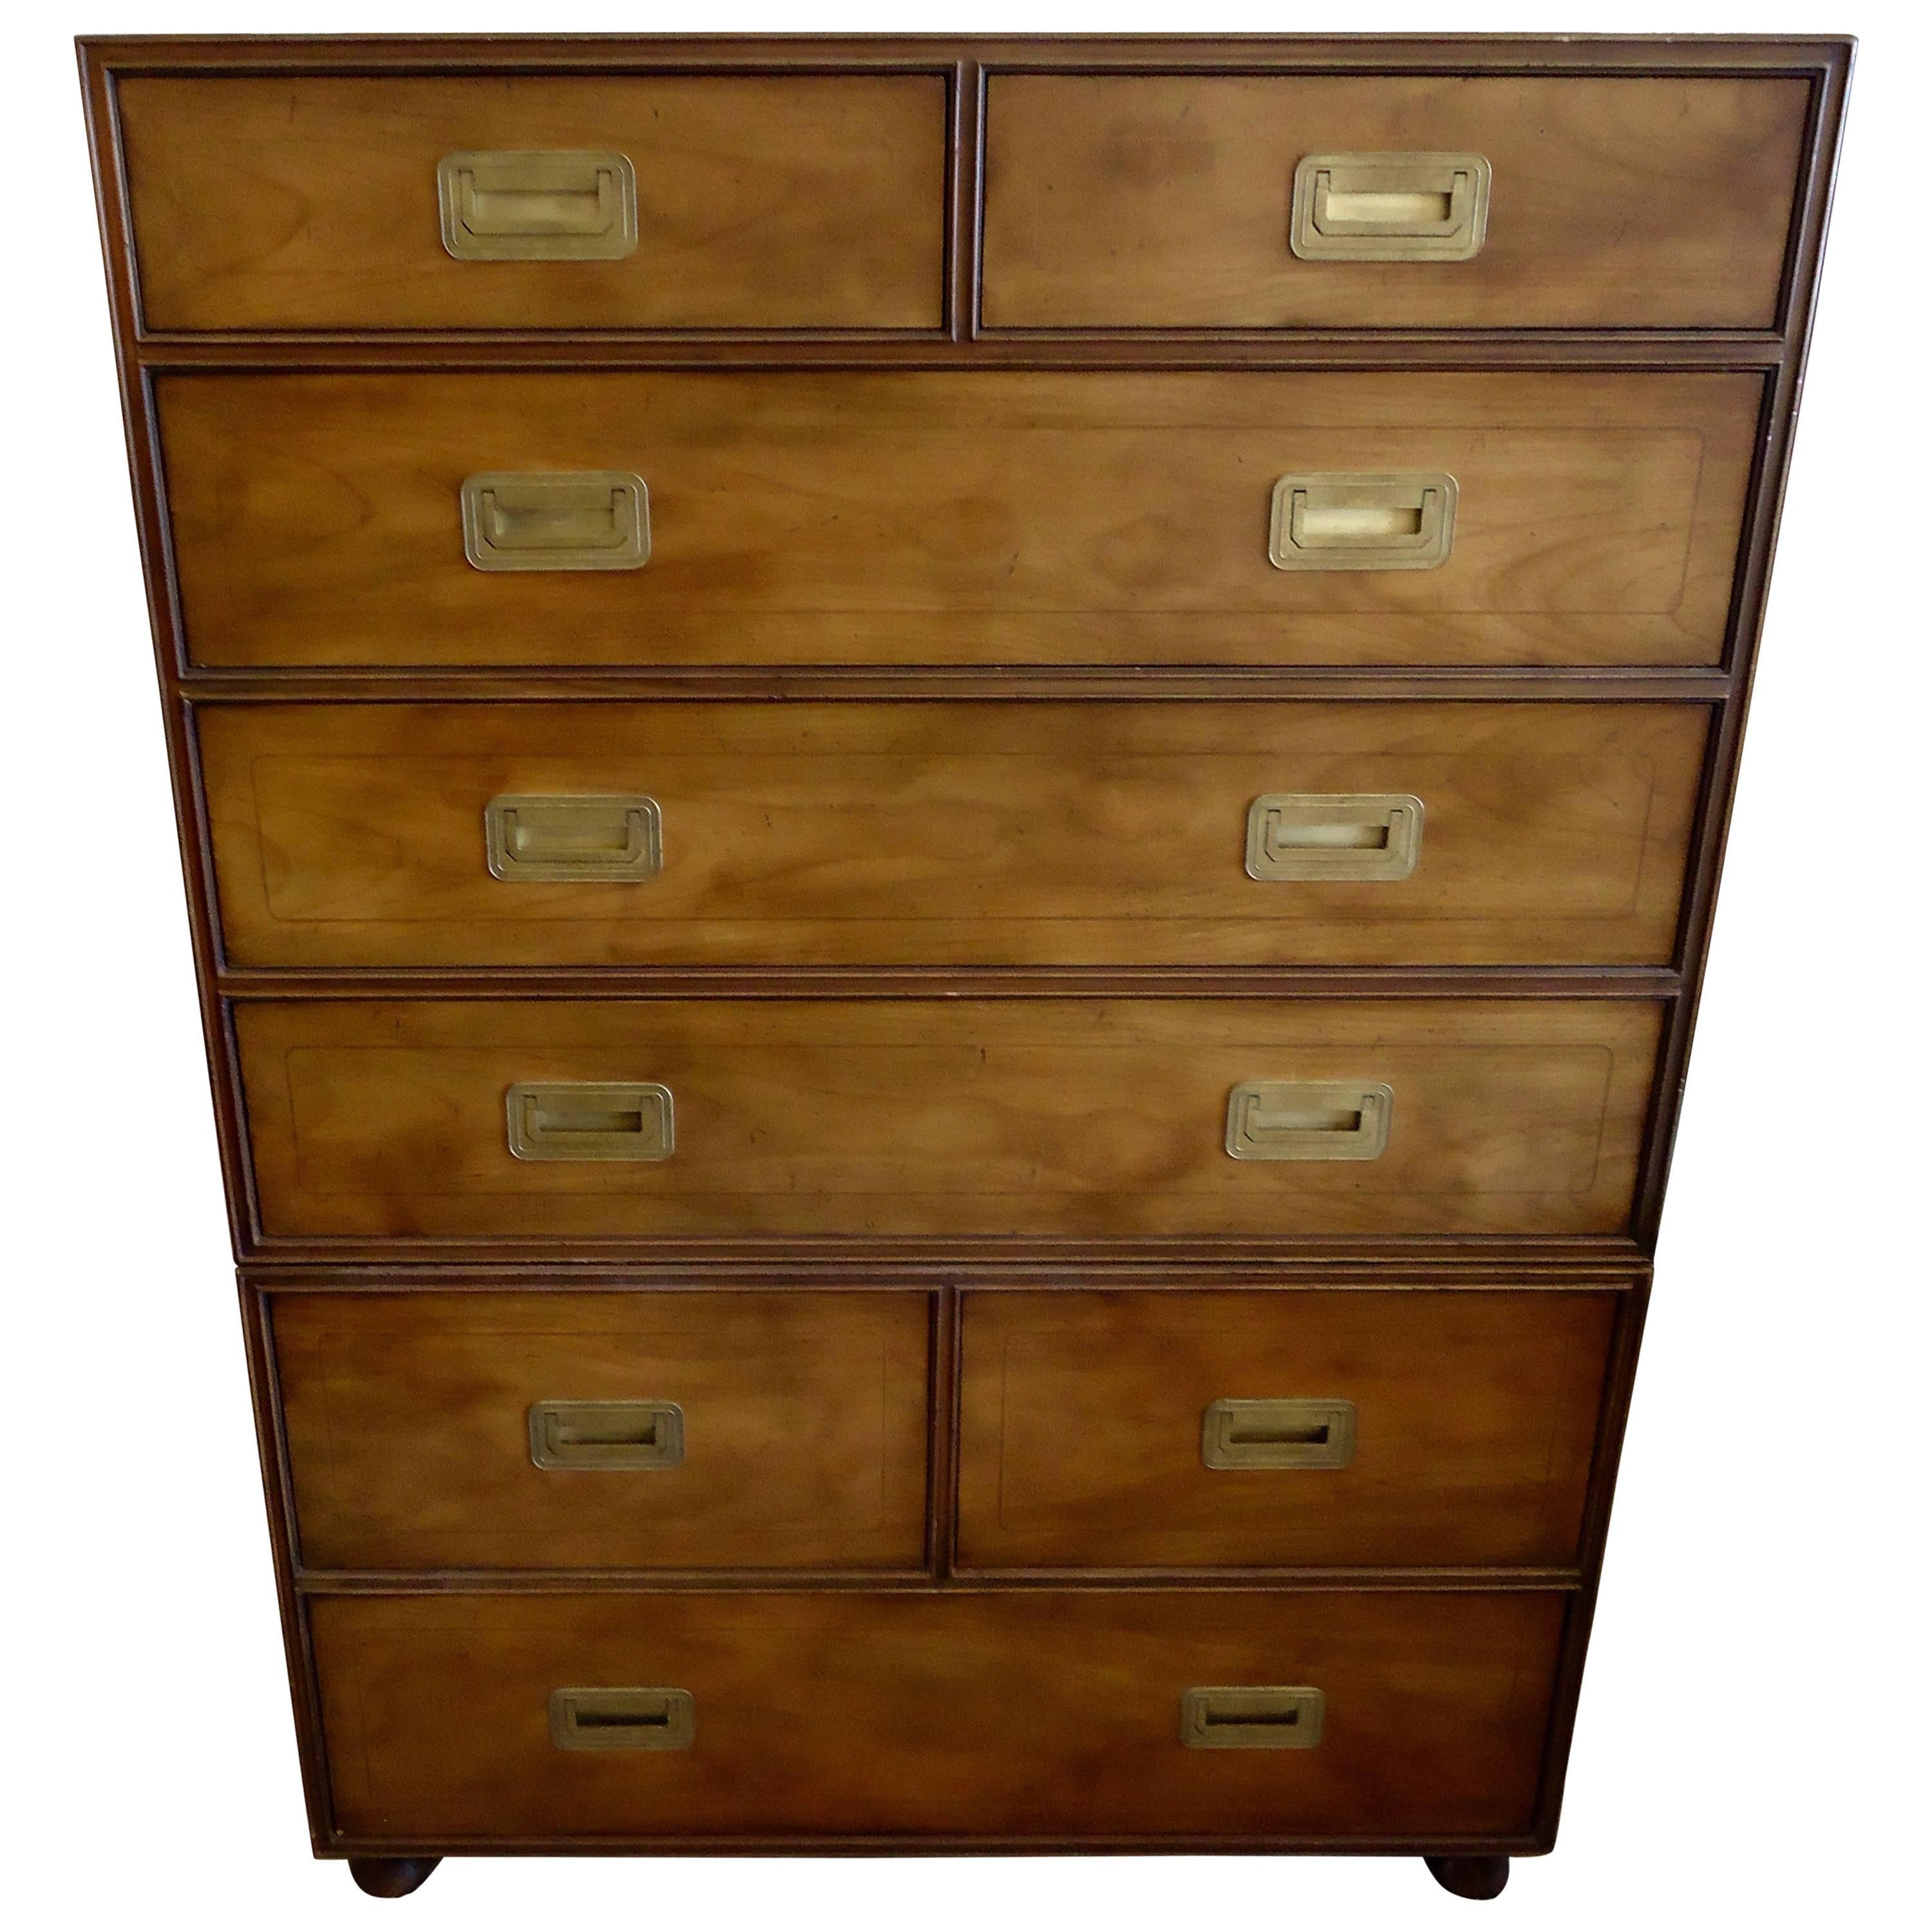 Campaign Style Wooden Dresser or Chest of Drawers by Baker